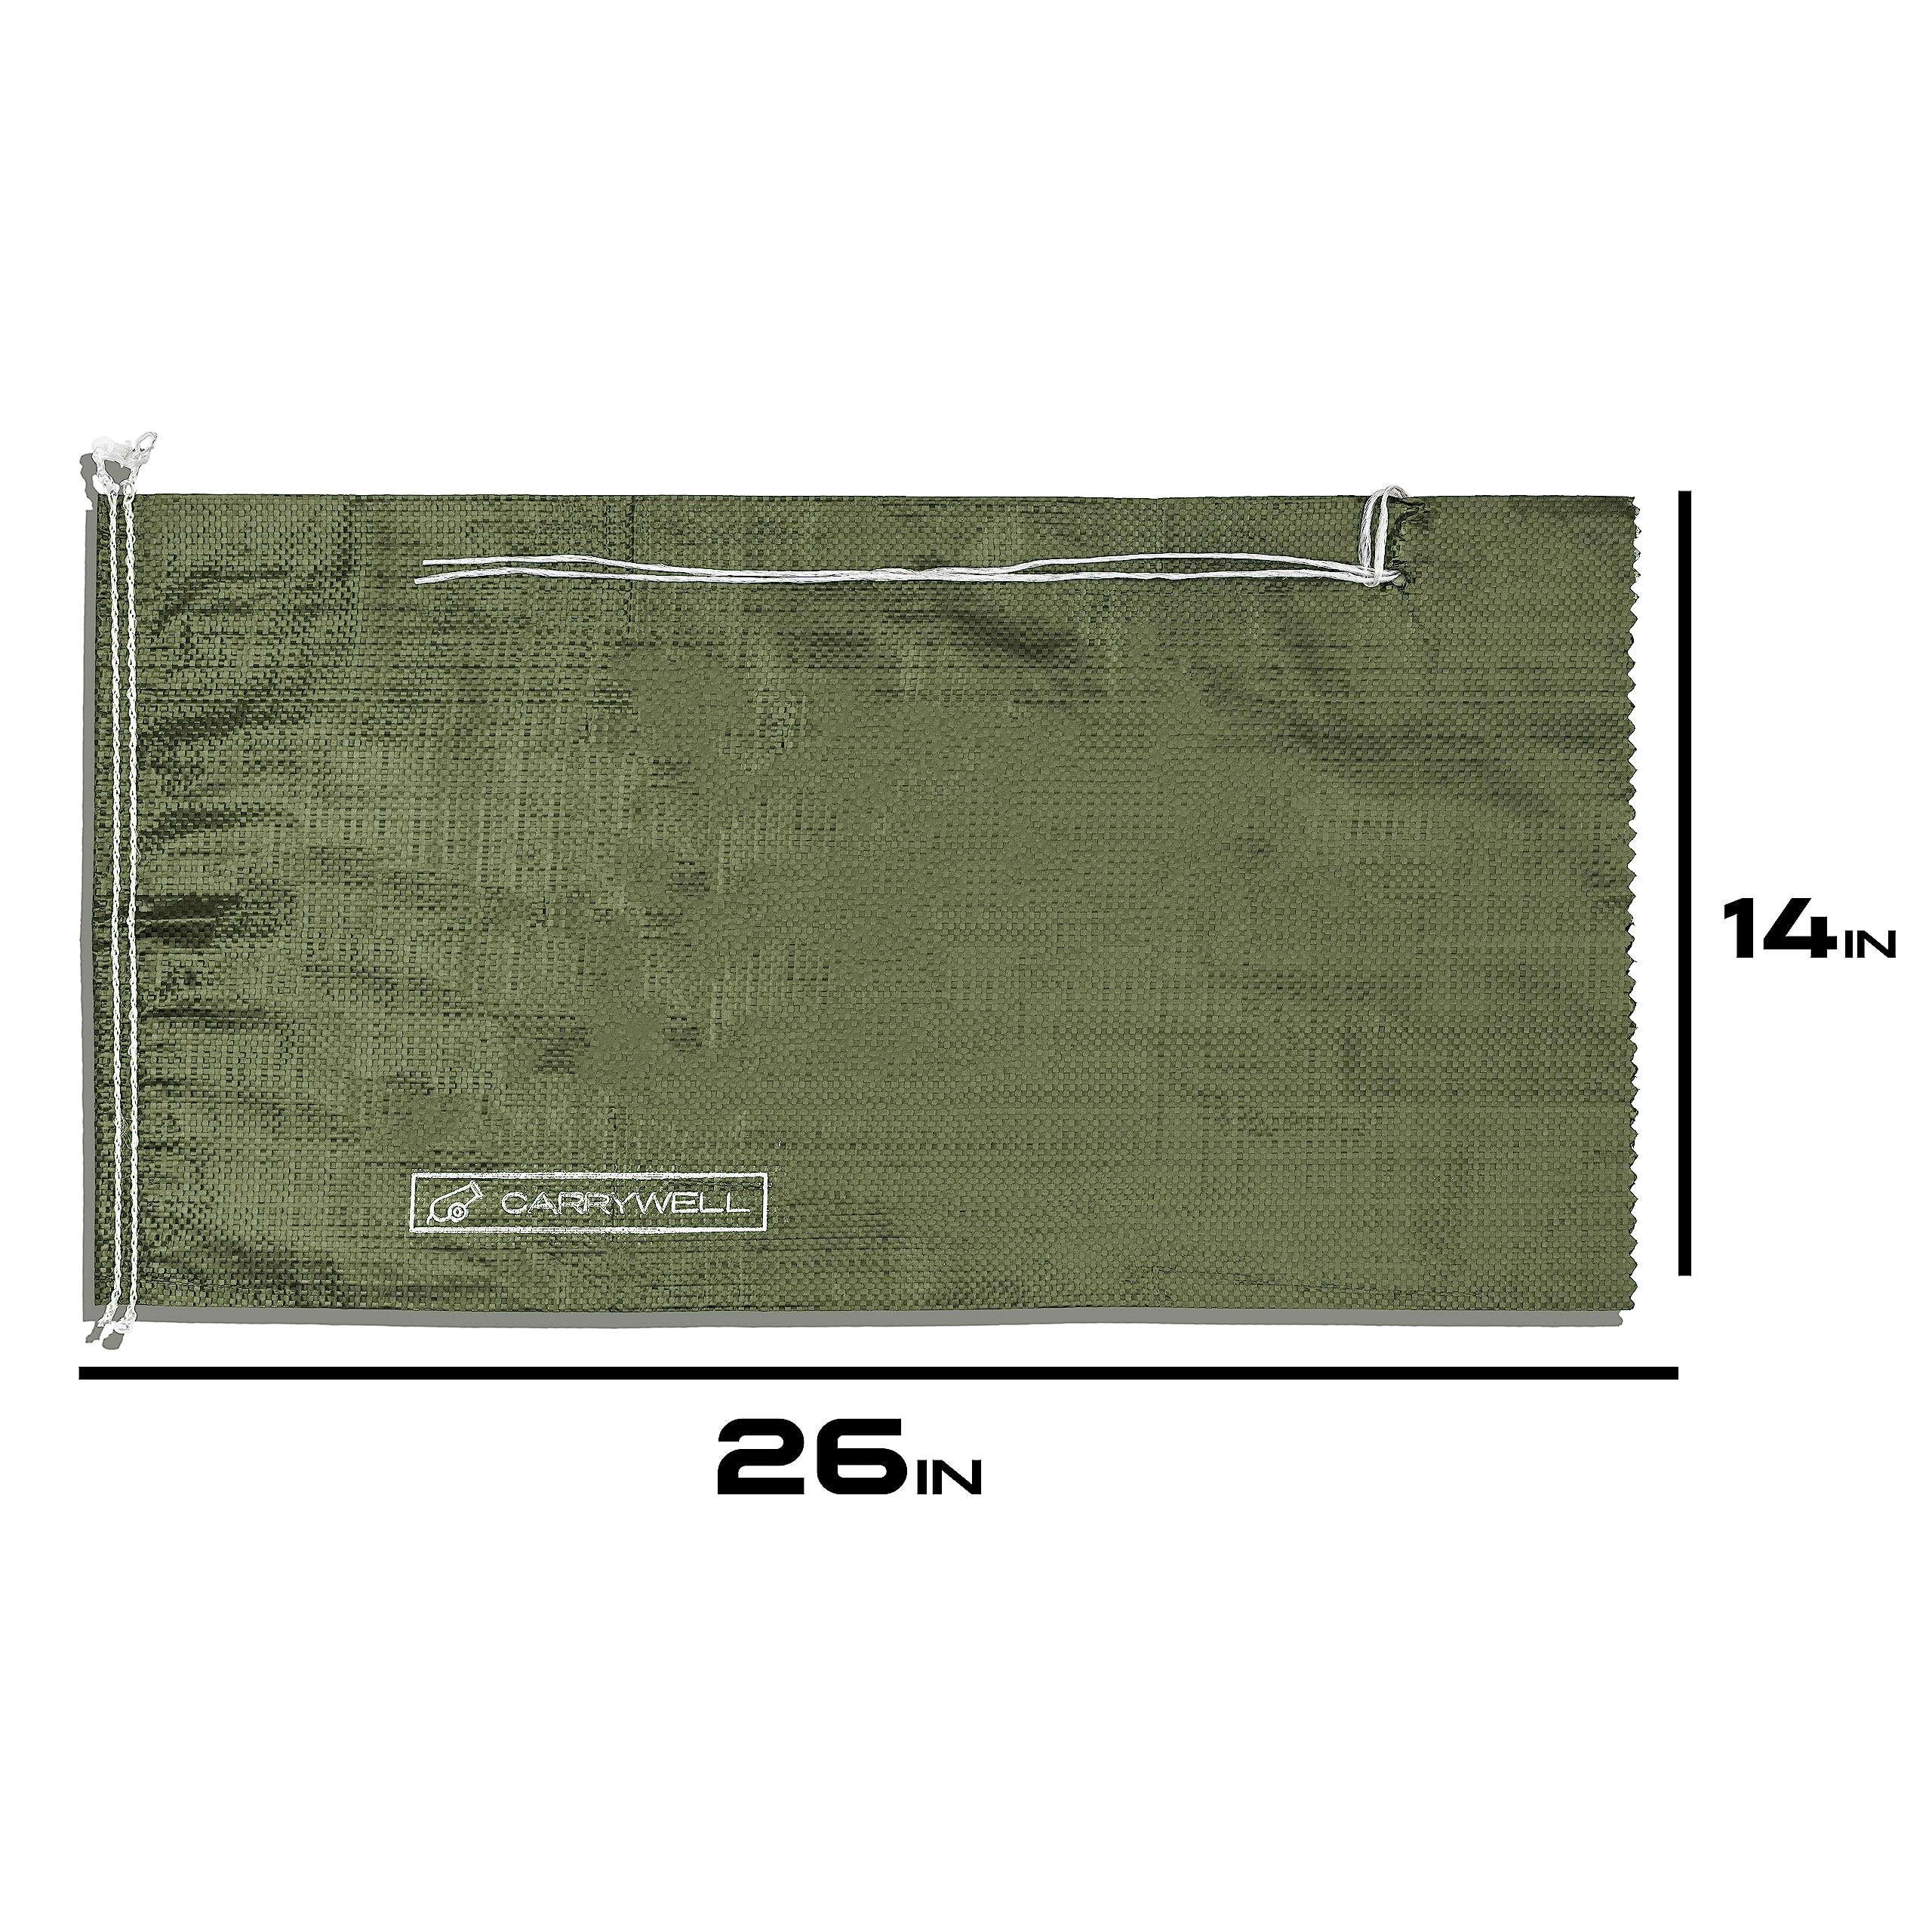 Carrywell (Not Made in China) Heavy Duty Sand Bags for Flooding, 14in x 26in with Tie Strings, Flood Water Barrier, UV Protection Sandbags for 1600 Hours (10 Bags, Green)